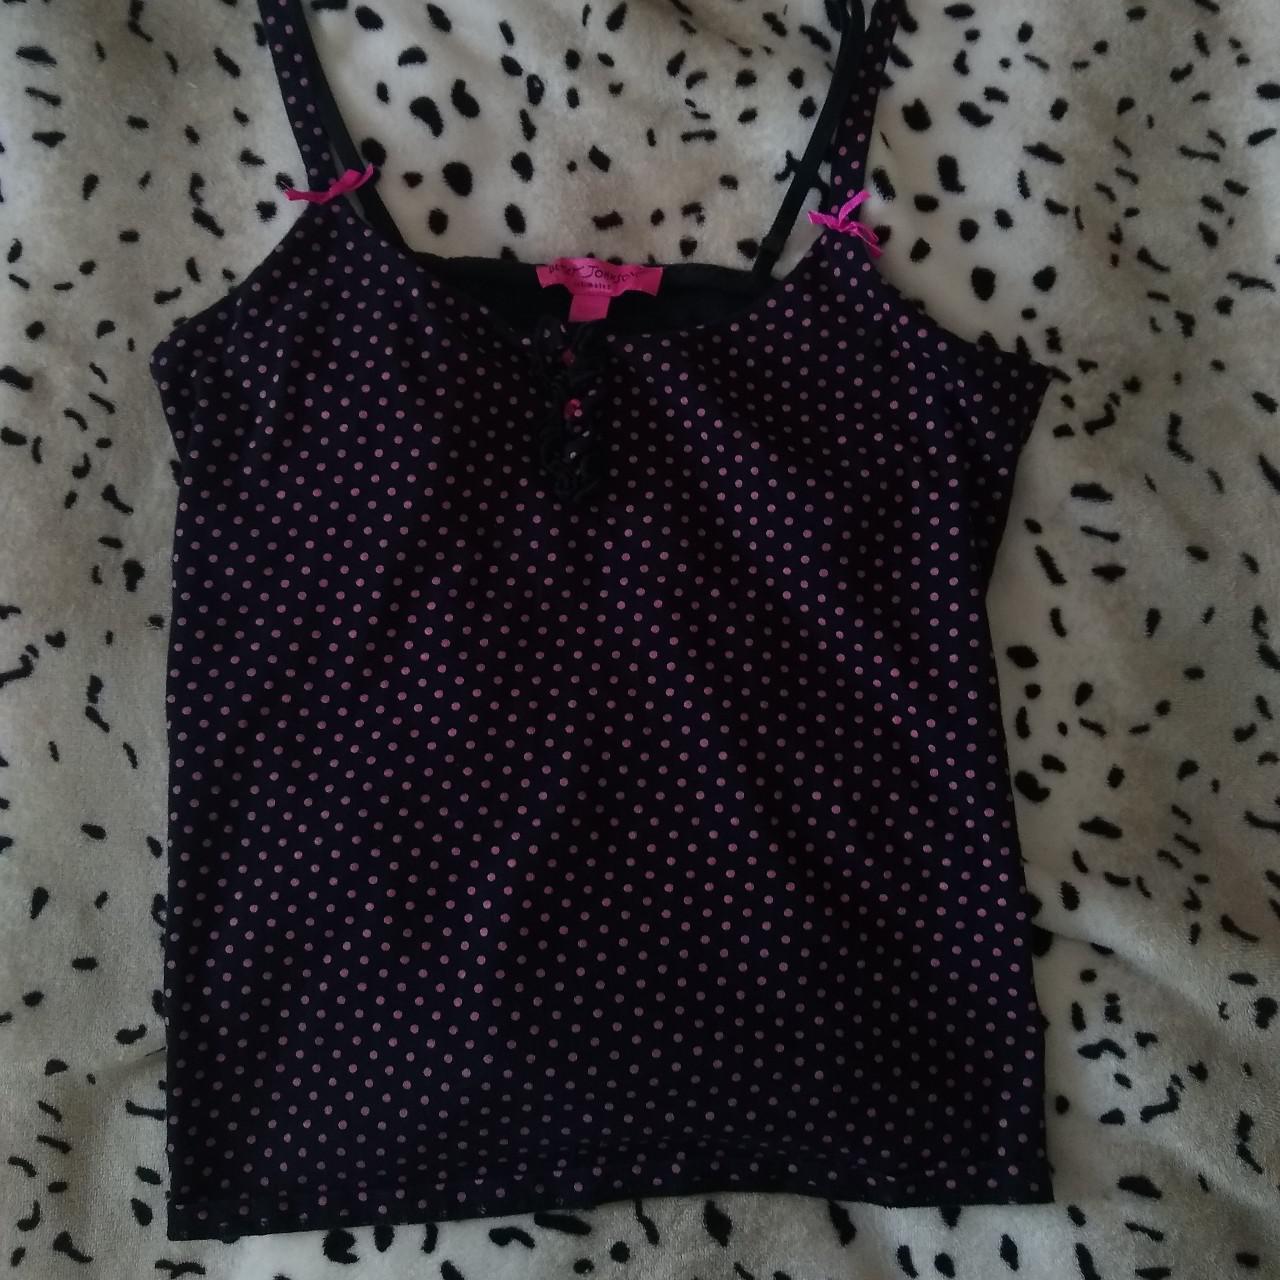 Product Image 1 - Vintage Betsey Johnson camisole. Covered